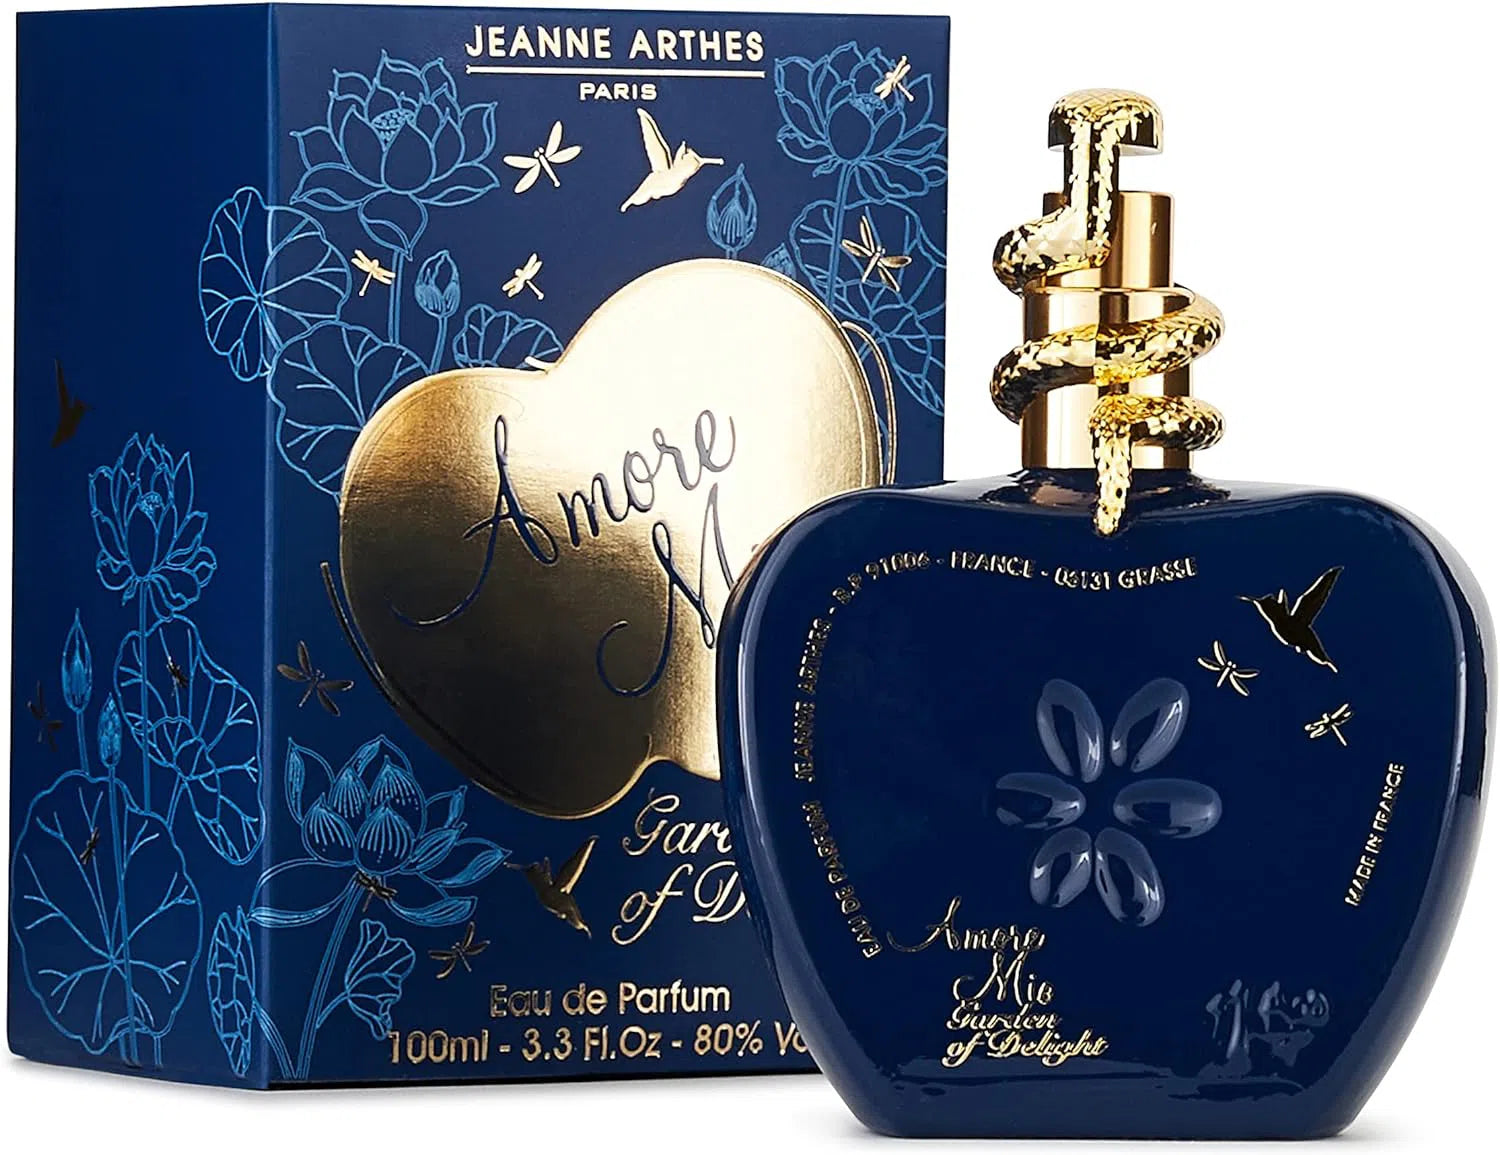 Jeanne Arthes Amore Mio Garden of Delights EDP for Women 100ml